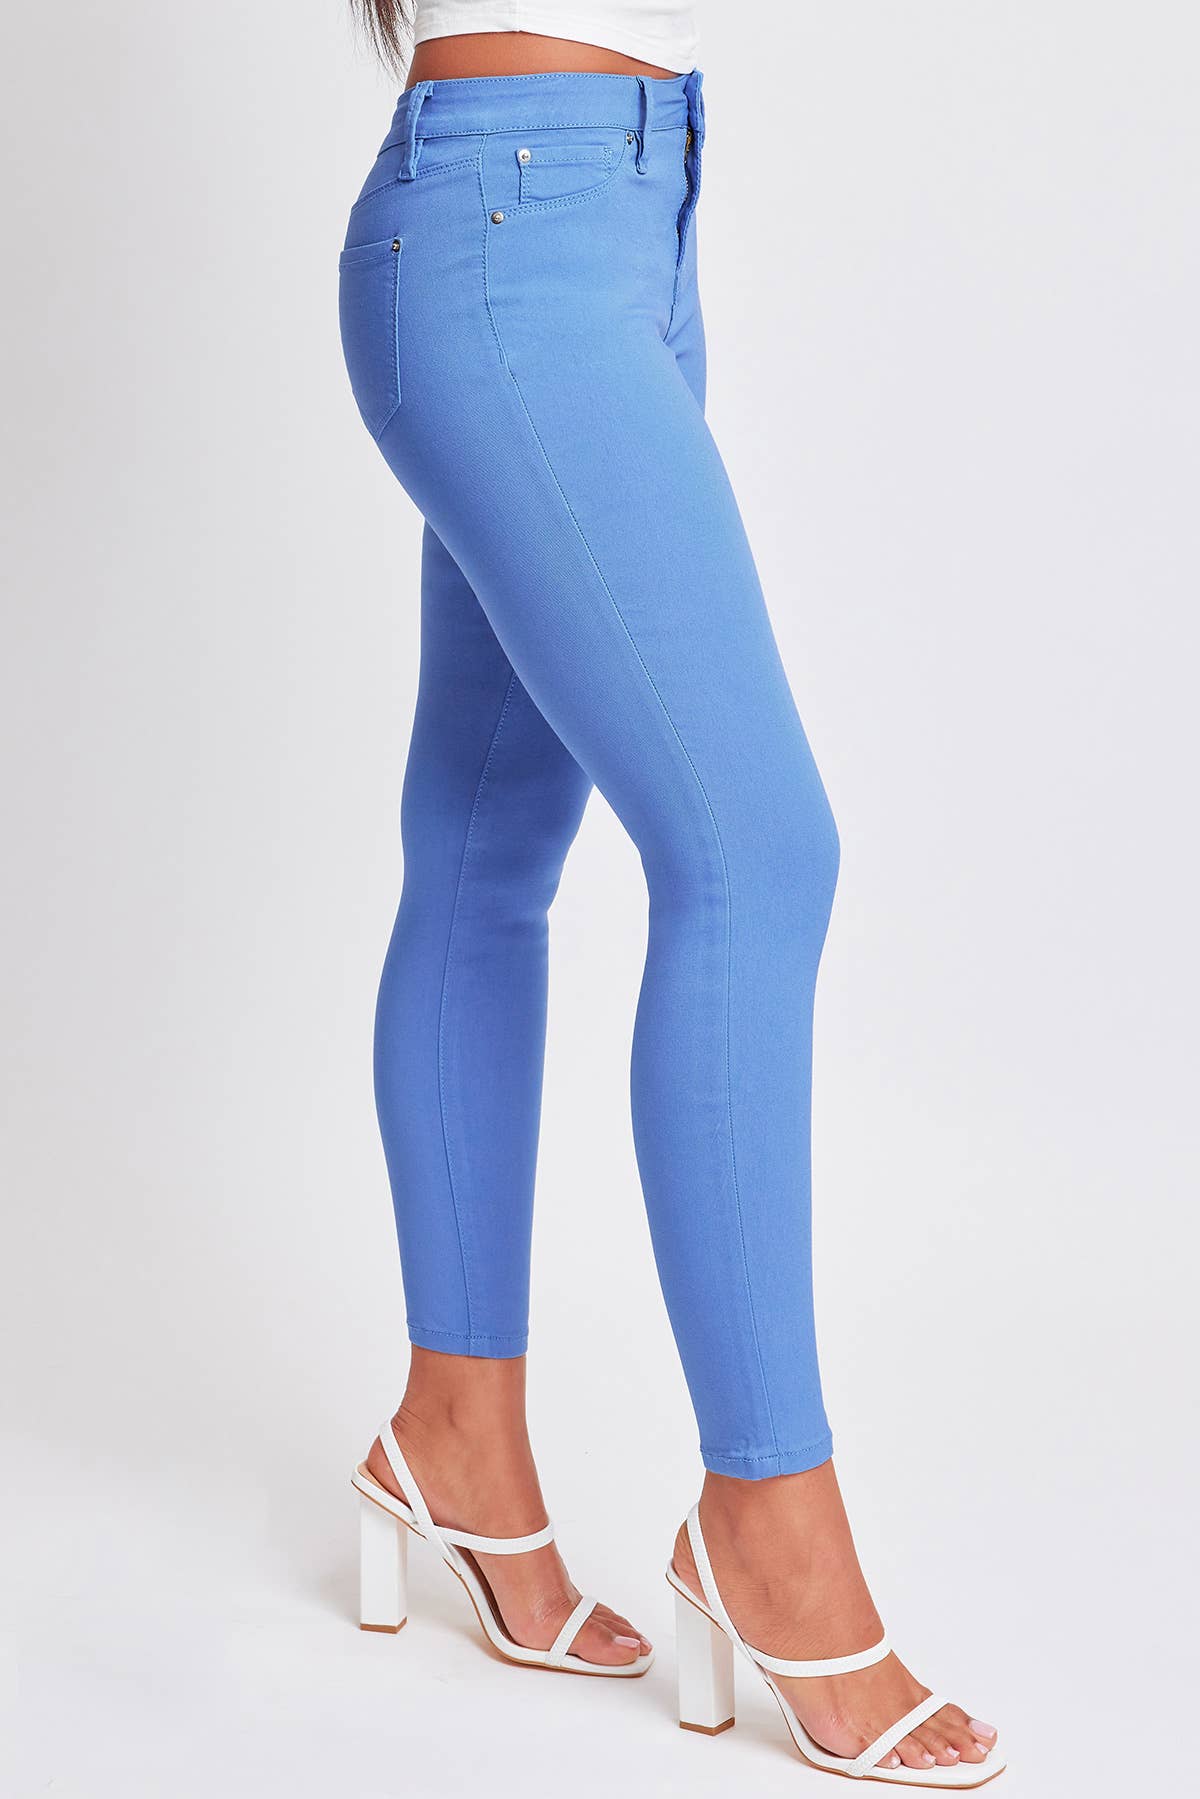 Blue Bay Hyperstretch Mid-Rise Skinny Jean